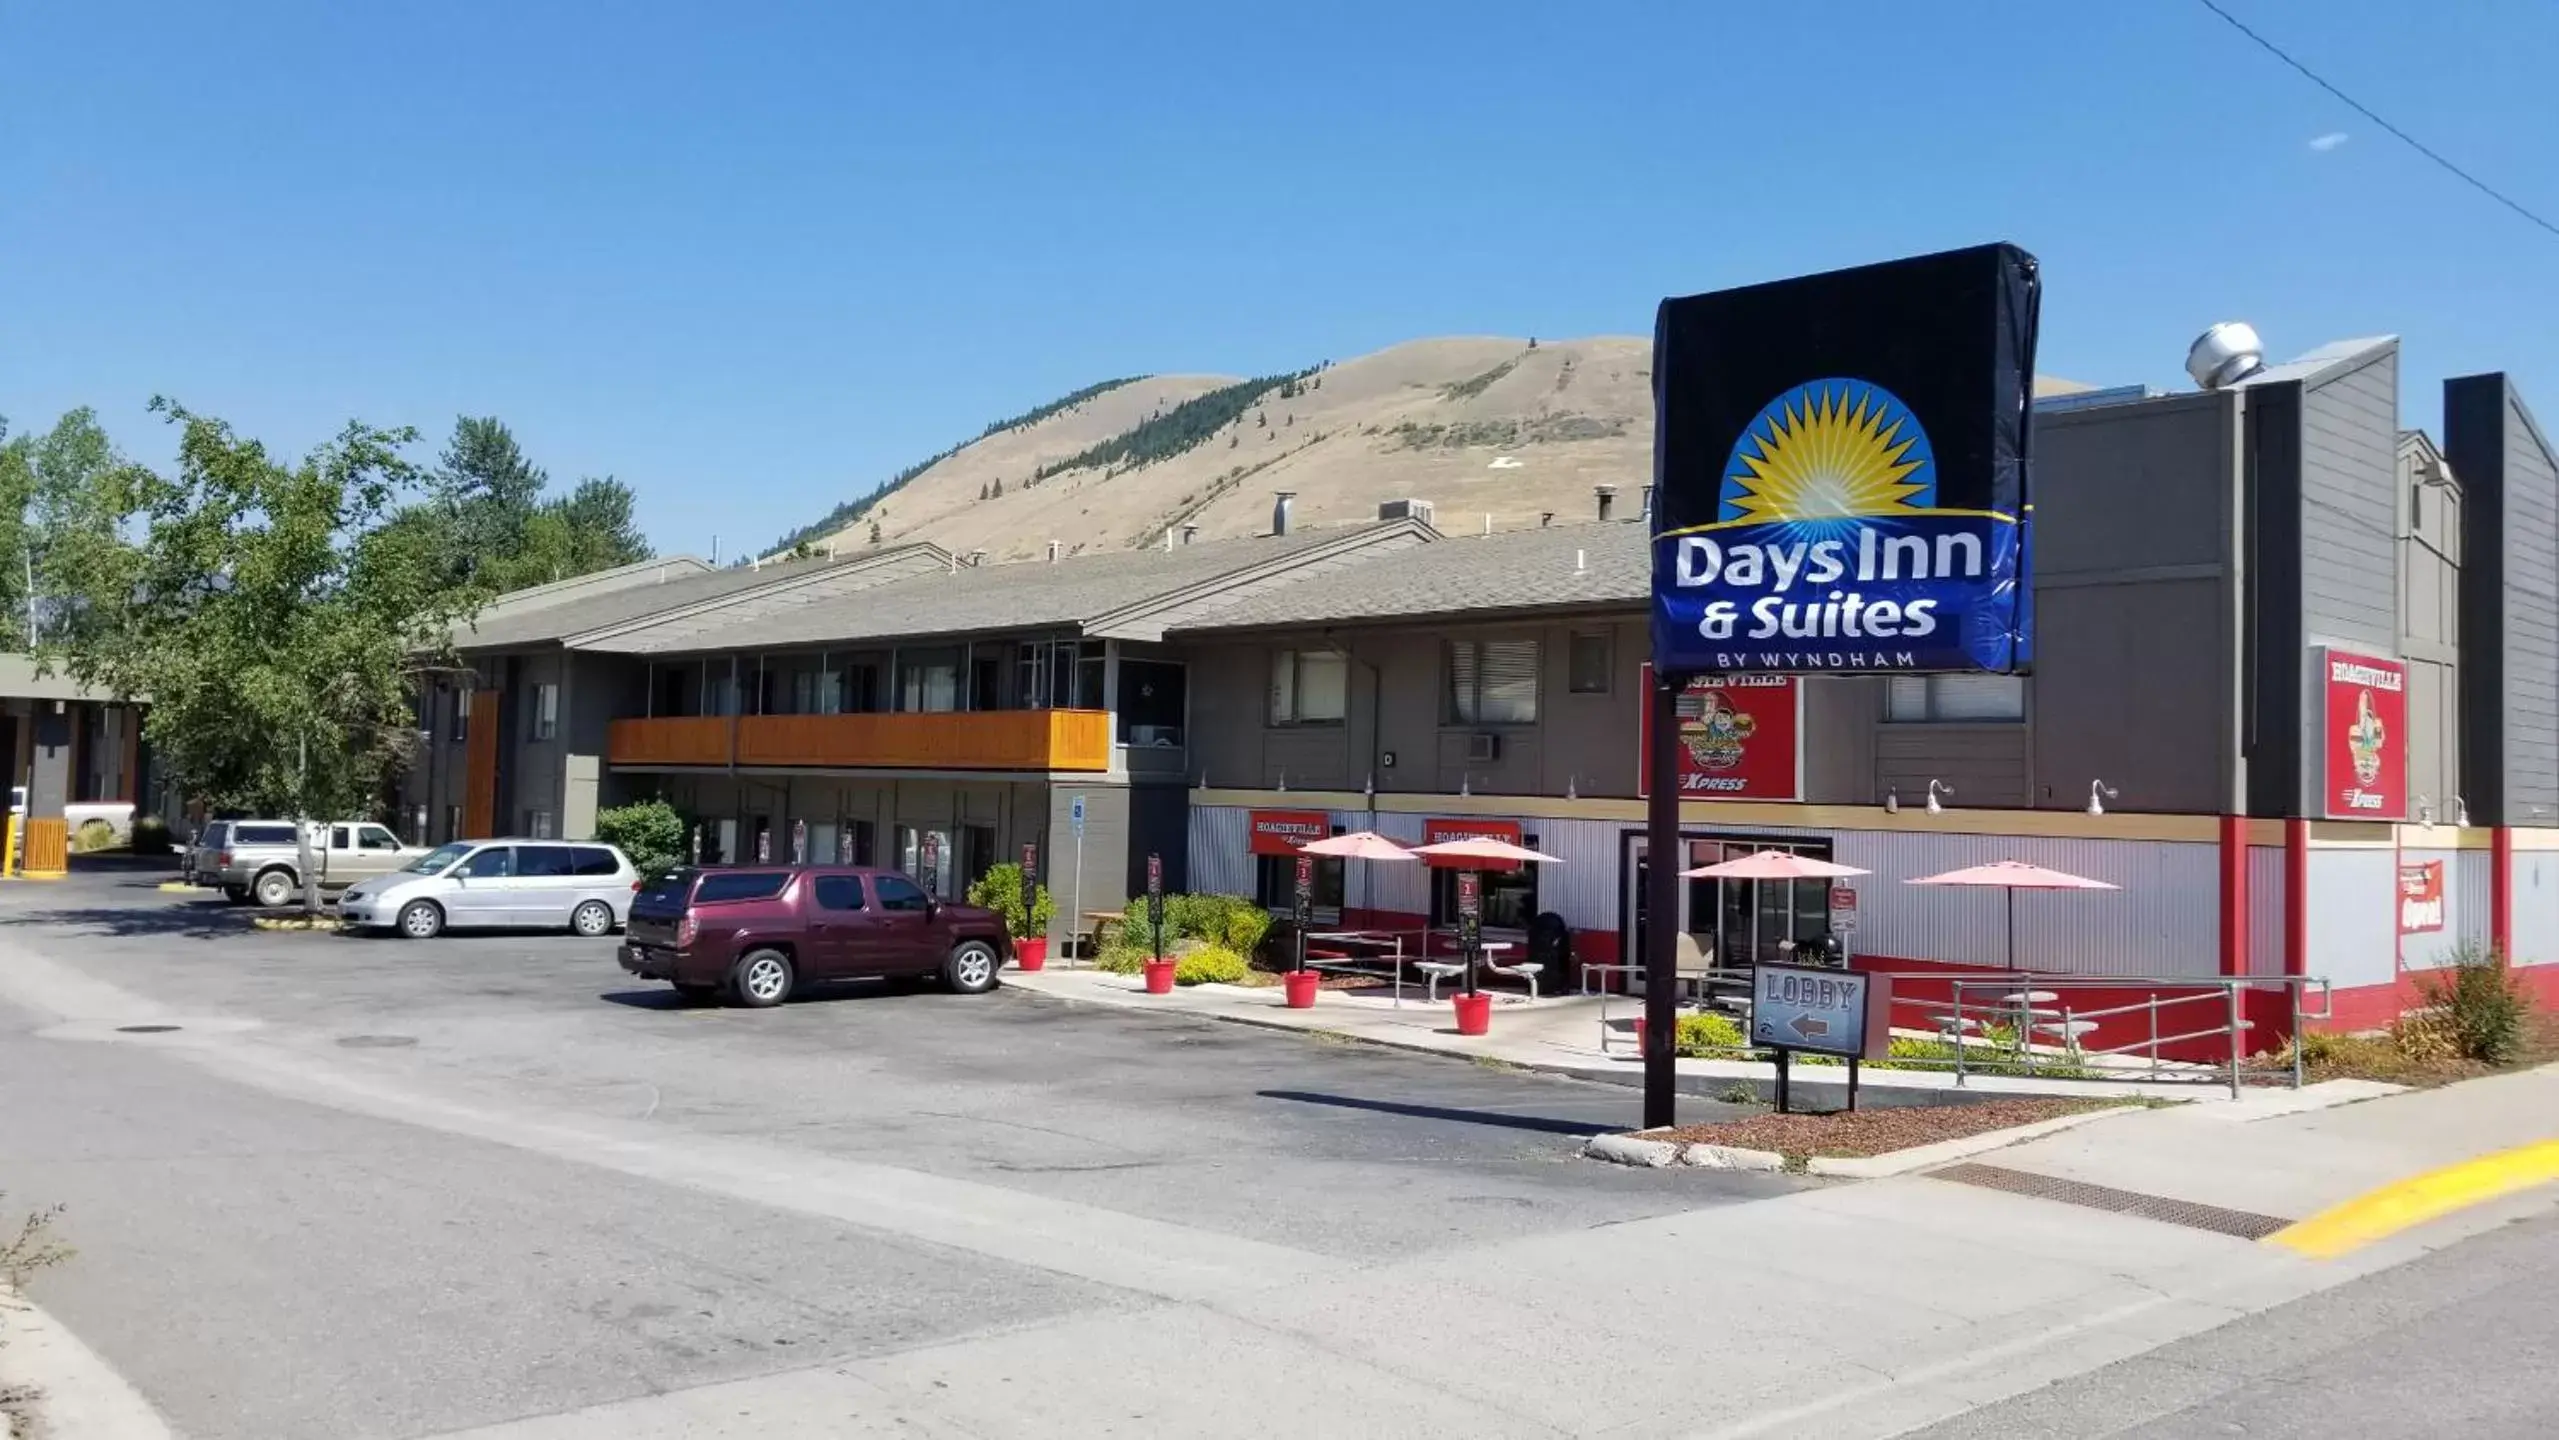 Property Building in Days Inn and Suites by Wyndham Downtown Missoula-University